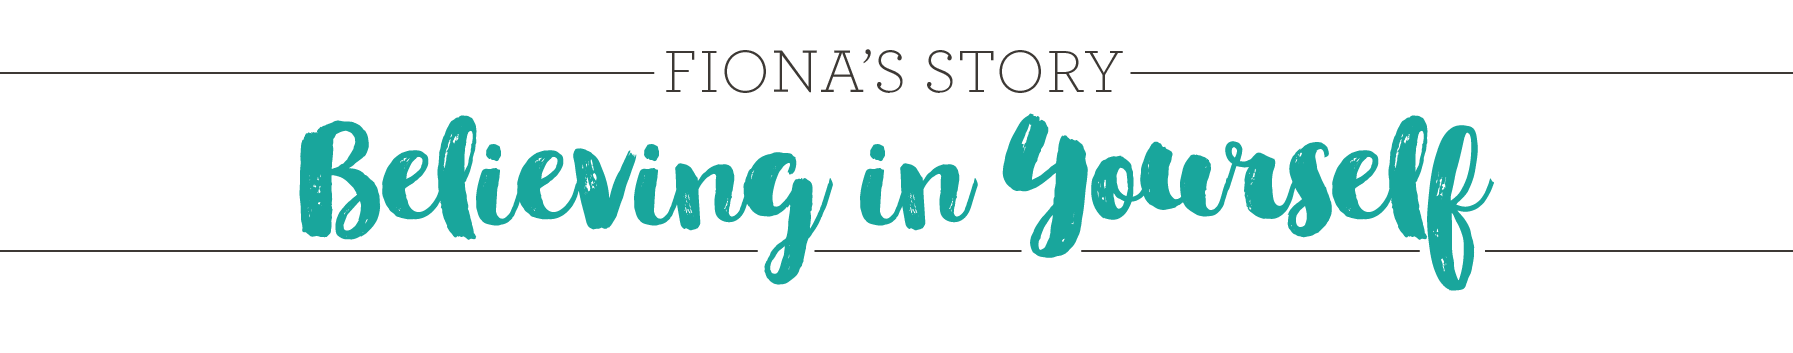 Fiona's Story Believe in Yourself